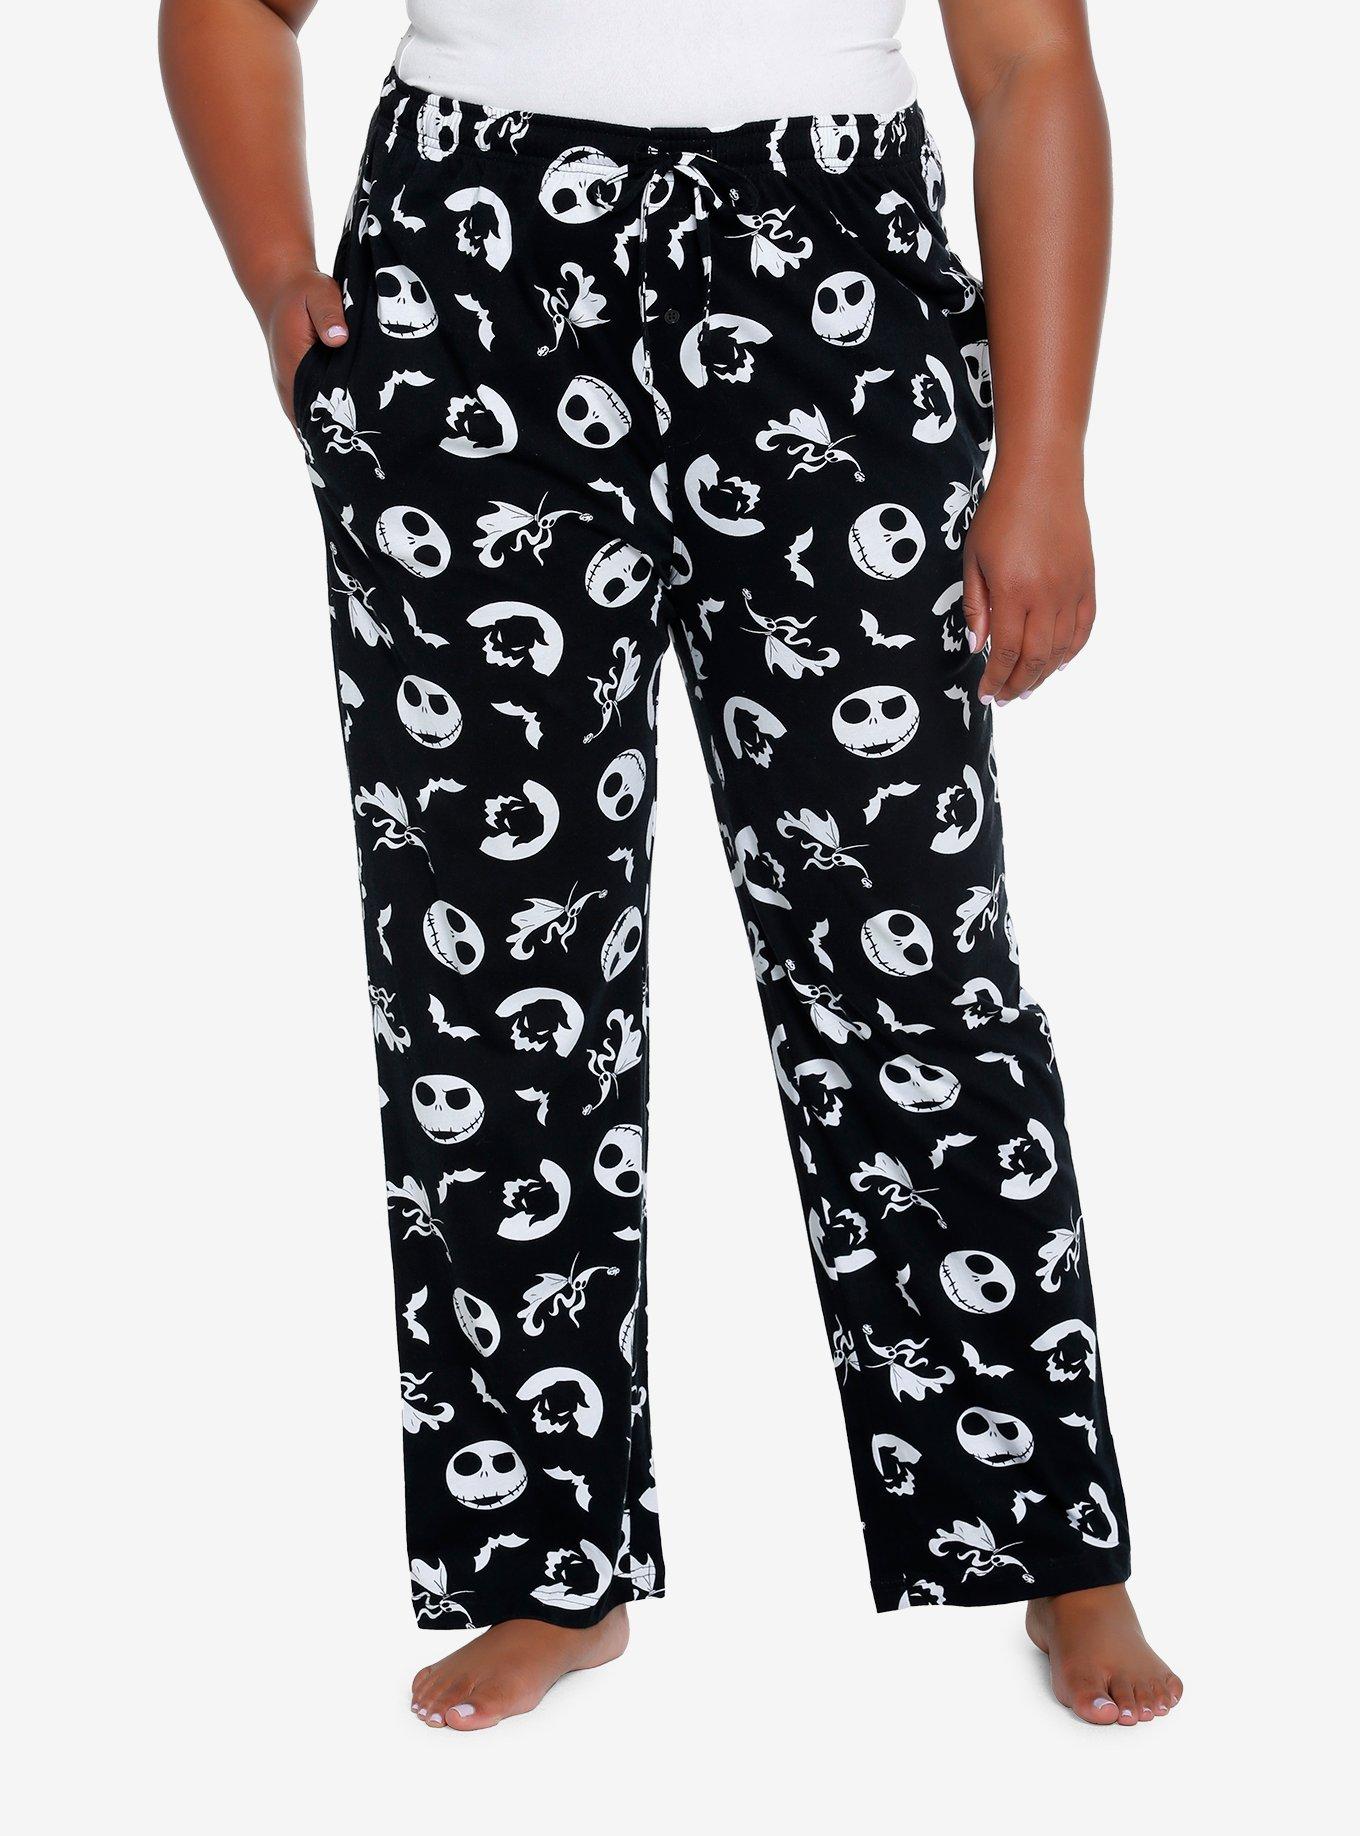 The Nightmare Before Christmas Trio Girls Lounge Pants Plus Size